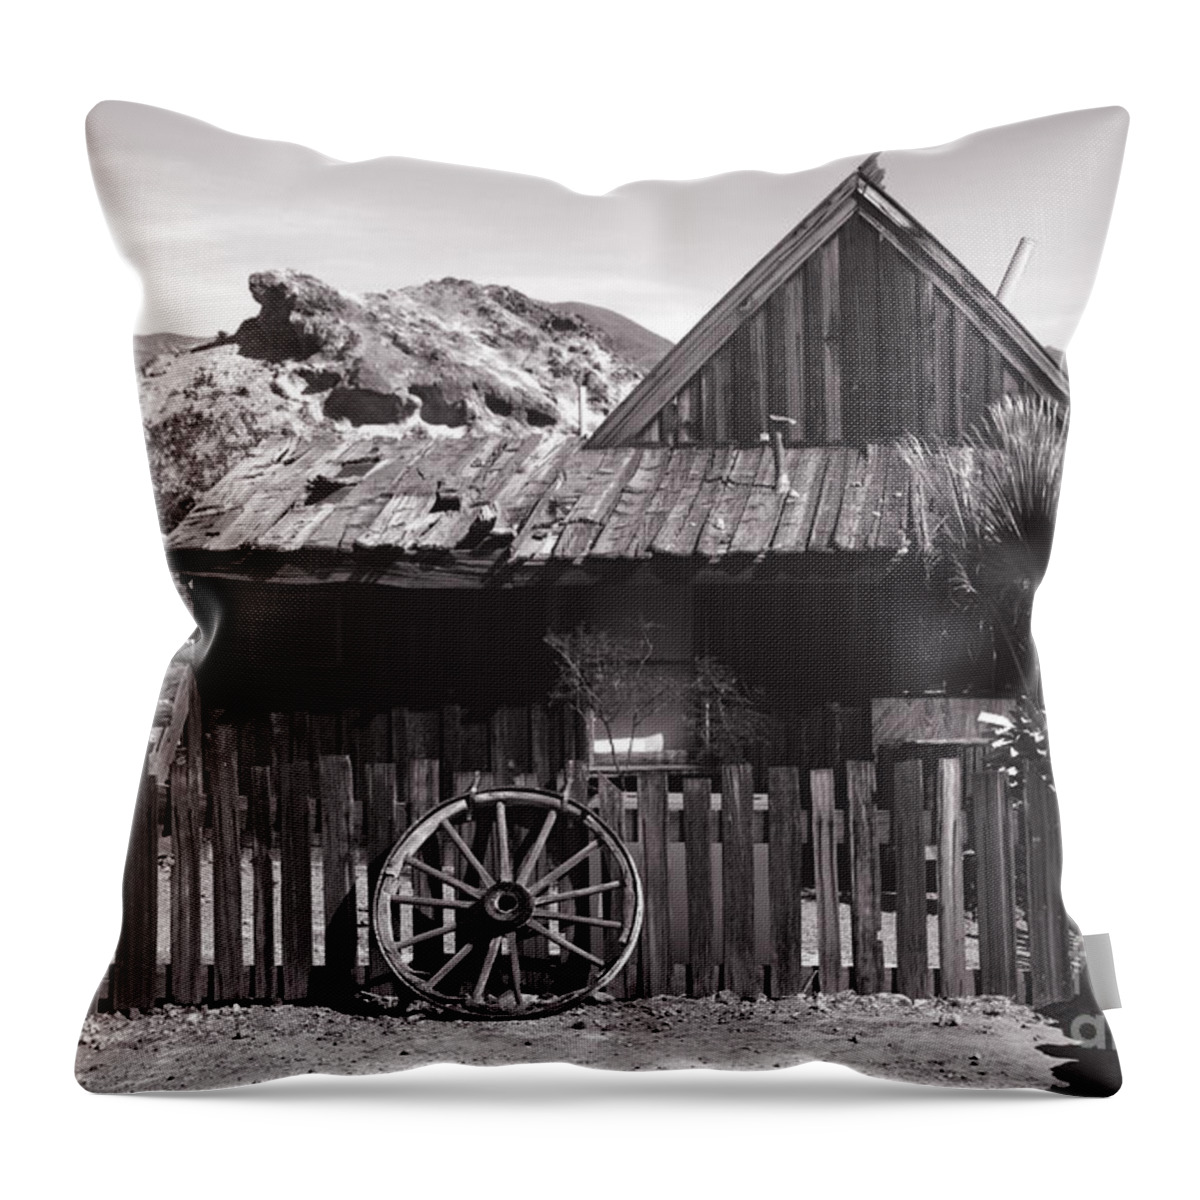 Cabins Throw Pillow featuring the photograph Calico Architecture by Susanne Van Hulst